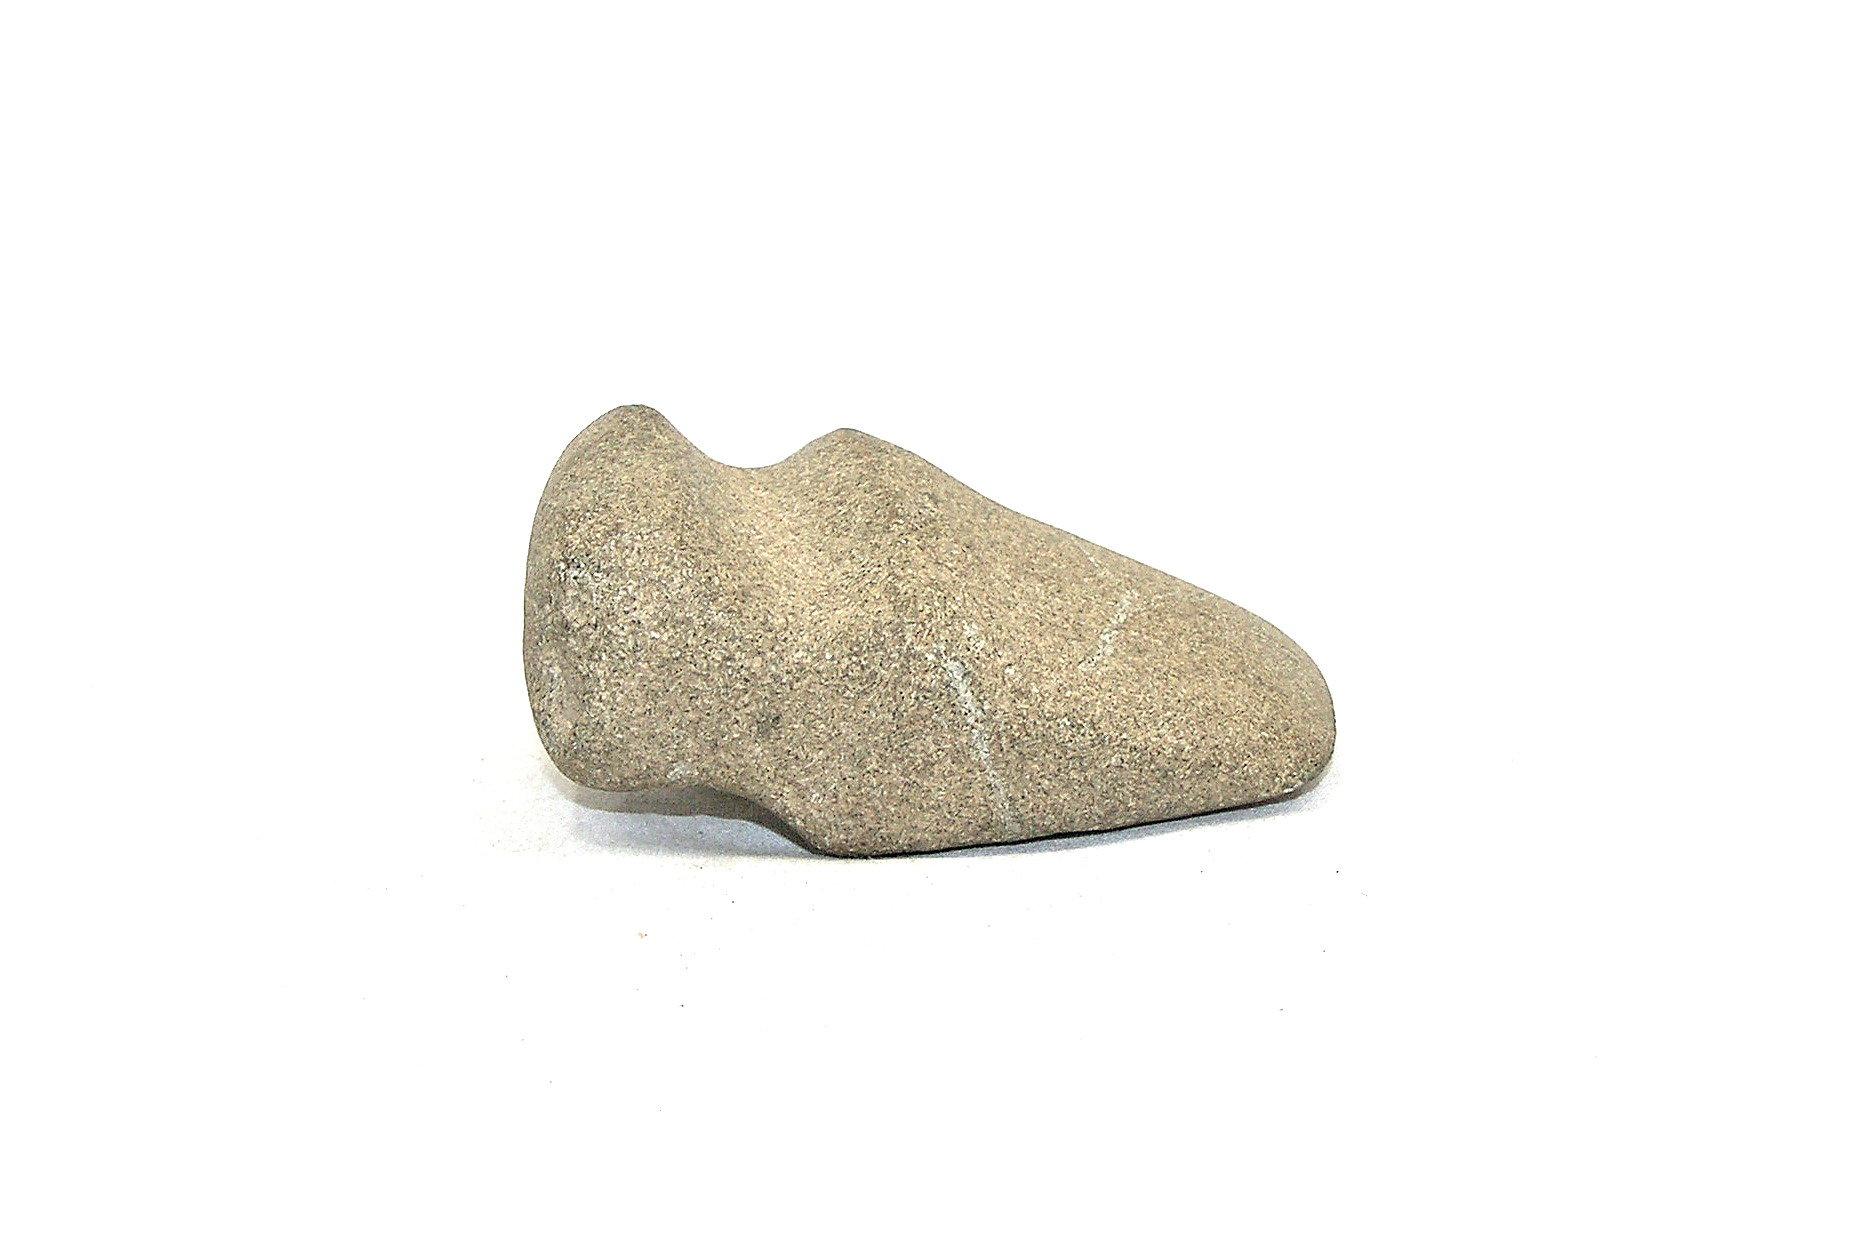 Vintage American Indian stone Axe Head.   5" x 3"